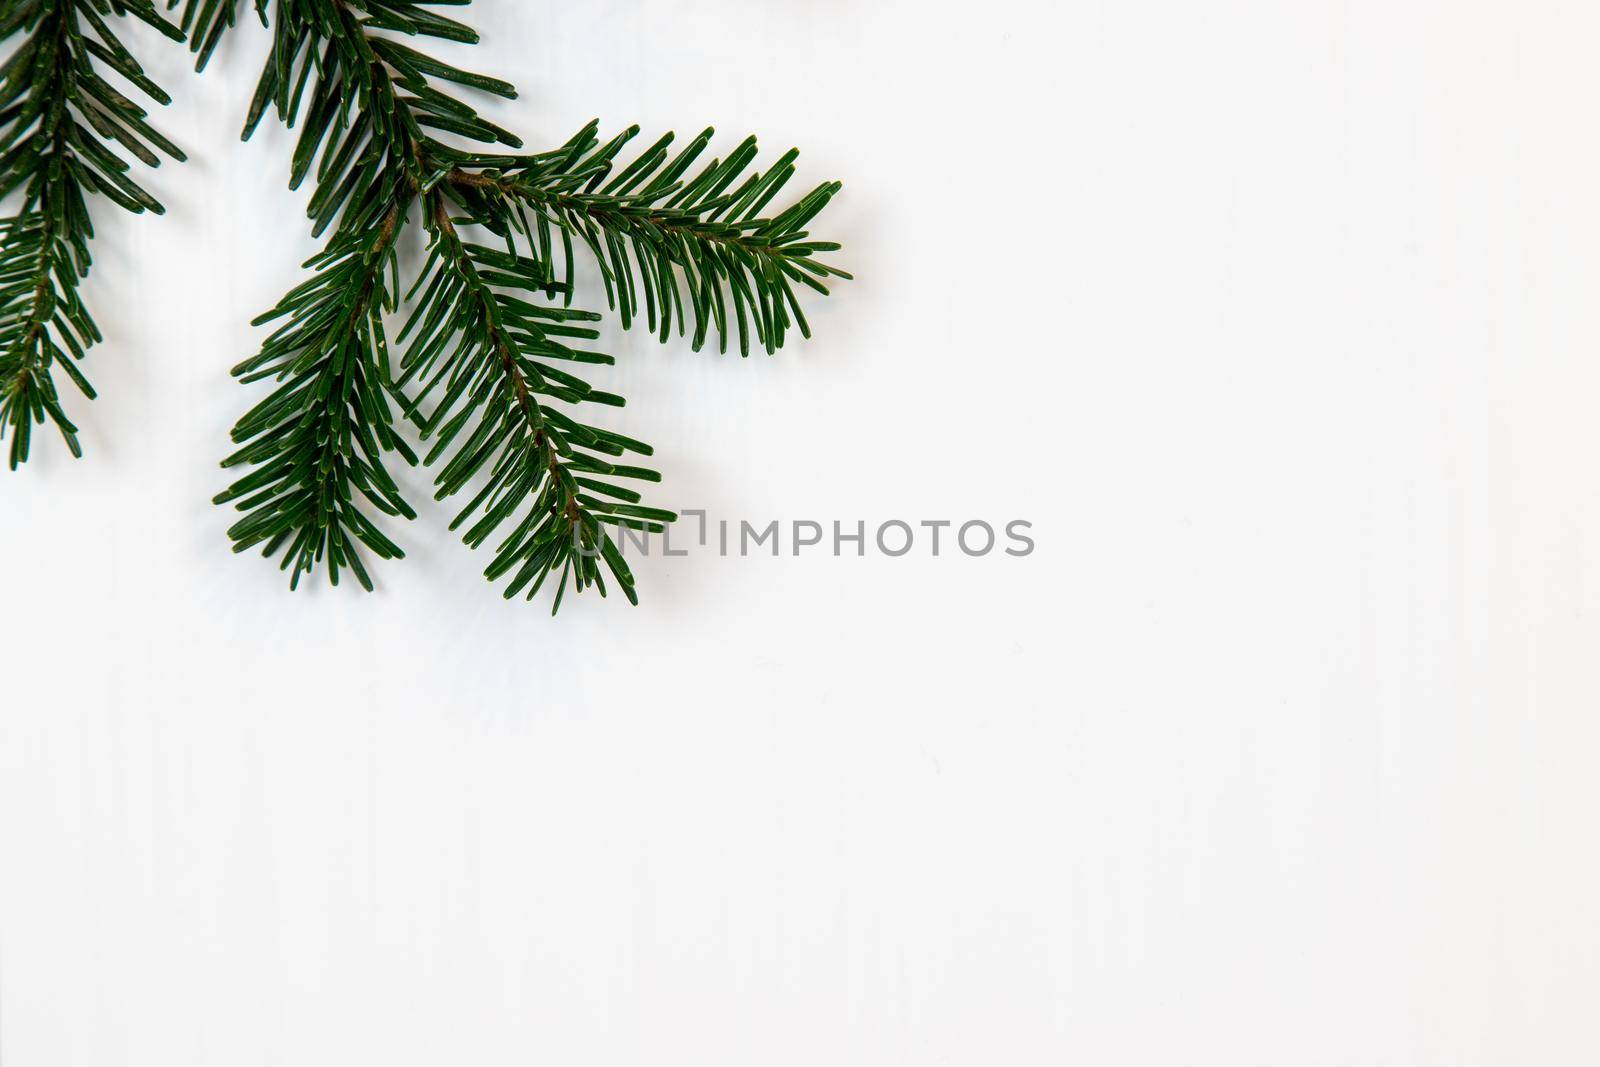 Christmas motif, texture, background with branch of a Nordmann fir on the top left on a white background with free space for text. by reinerc